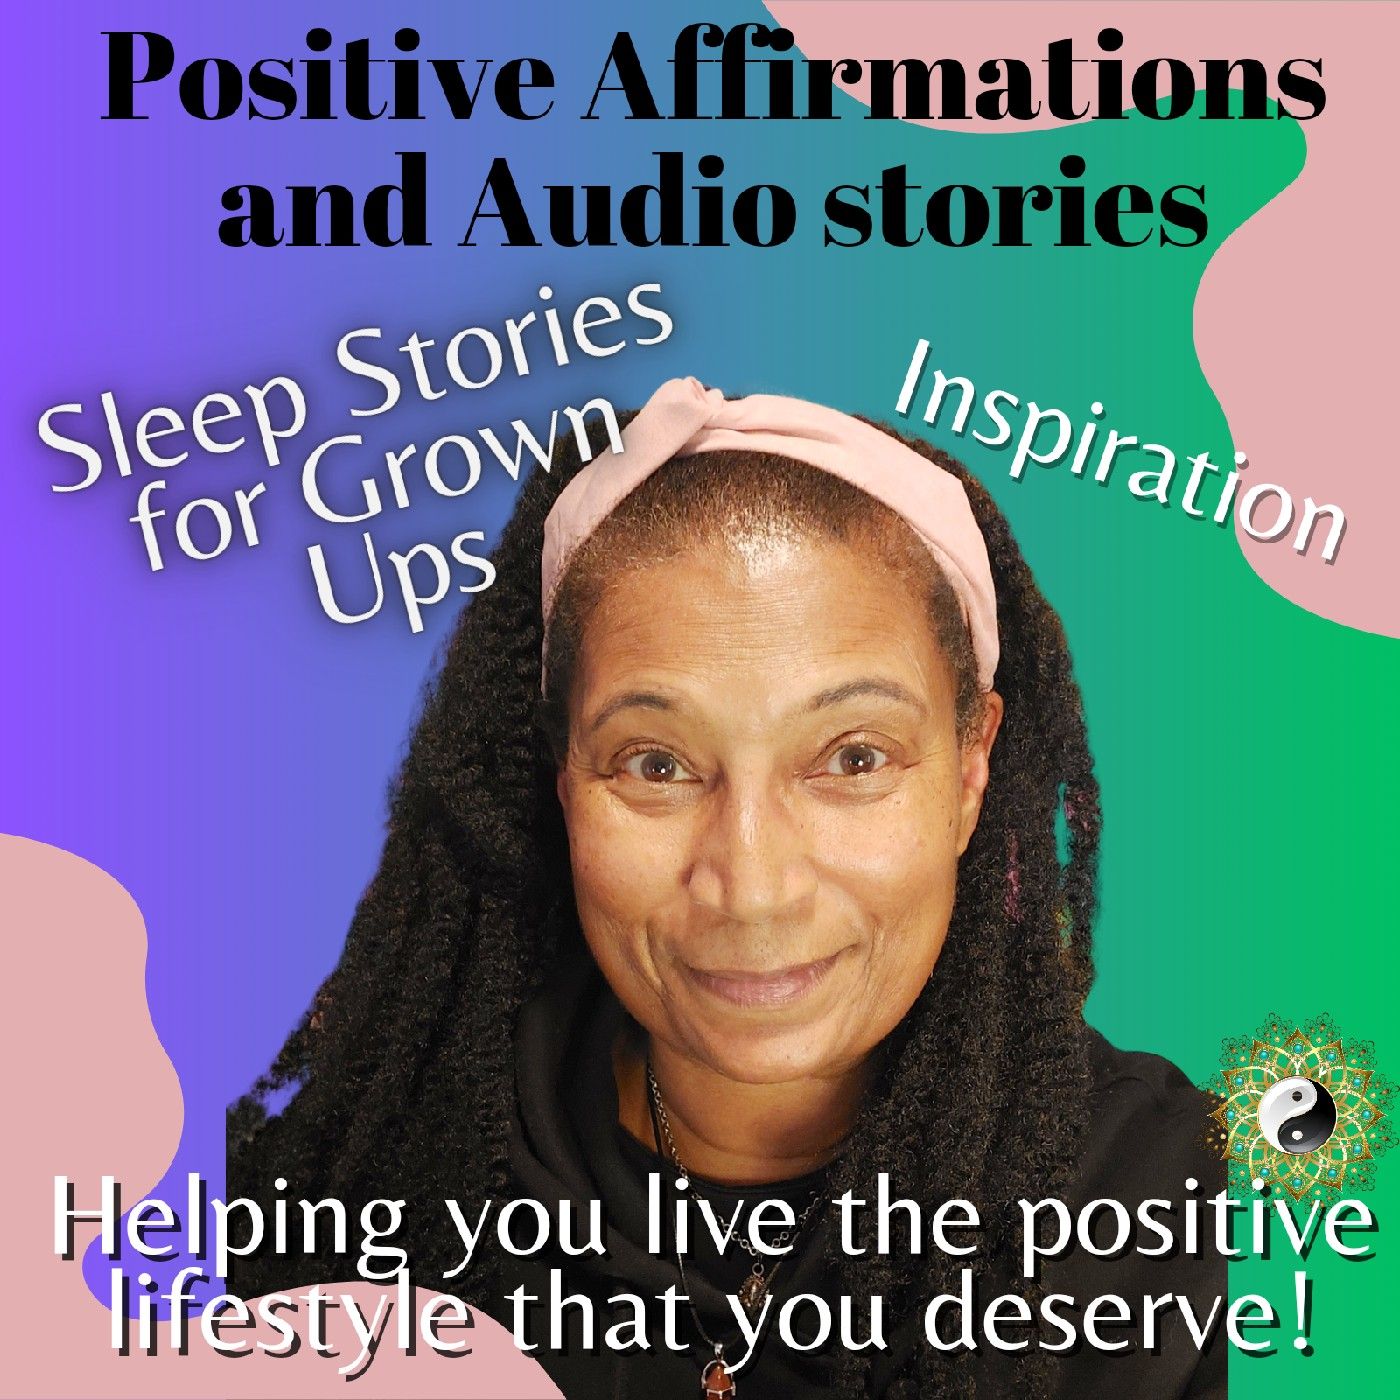 Positive Affirmations and Audio Stories